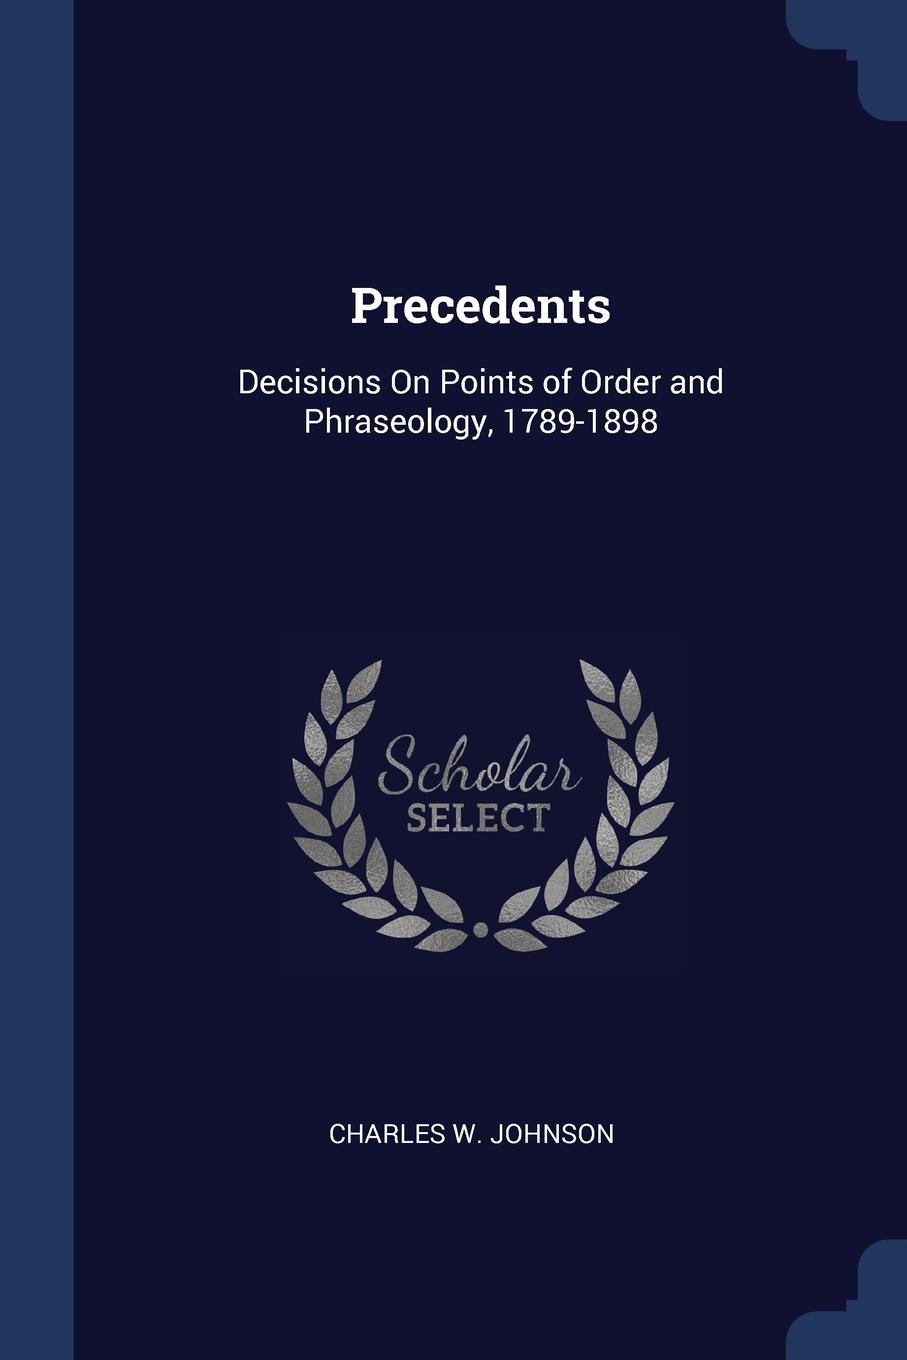 Precedents. Decisions On Points of Order and Phraseology, 1789-1898